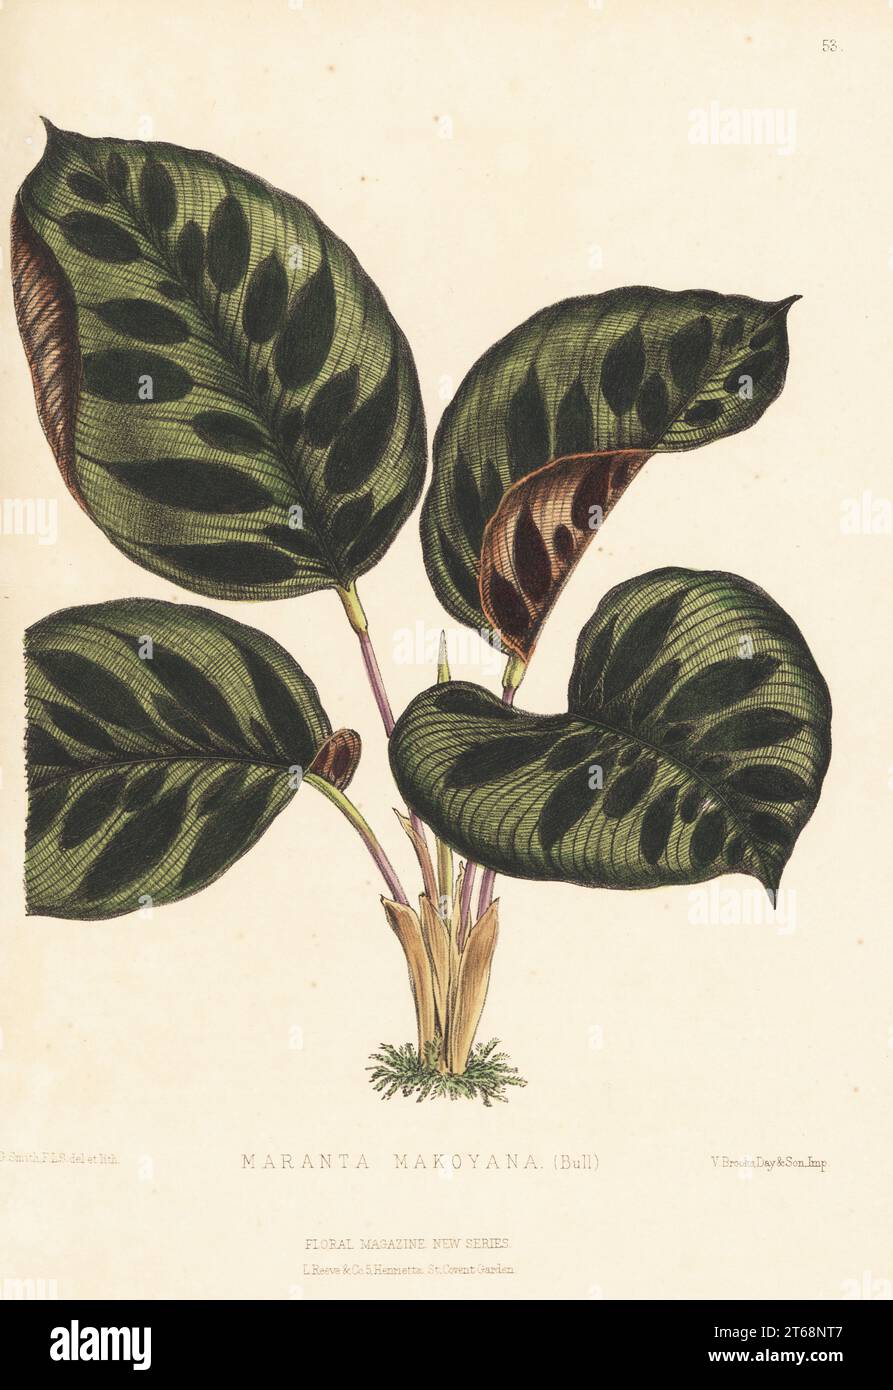 Peacock plant or cathedral windows, Calathea makoyana. As Maranta makoyana (Bull) or Maranta olivaris. Named after Mr Makoy of Liege. Handcolored botanical illustration drawn and lithographed by Worthington George Smith from Henry Honywood Dombrain's Floral Magazine, New Series, Volume 2, L. Reeve, London, 1873. Clergyman gardener Dombrain (1818-1905) edited the Floral Magazine from 1862 to 1873. Stock Photo